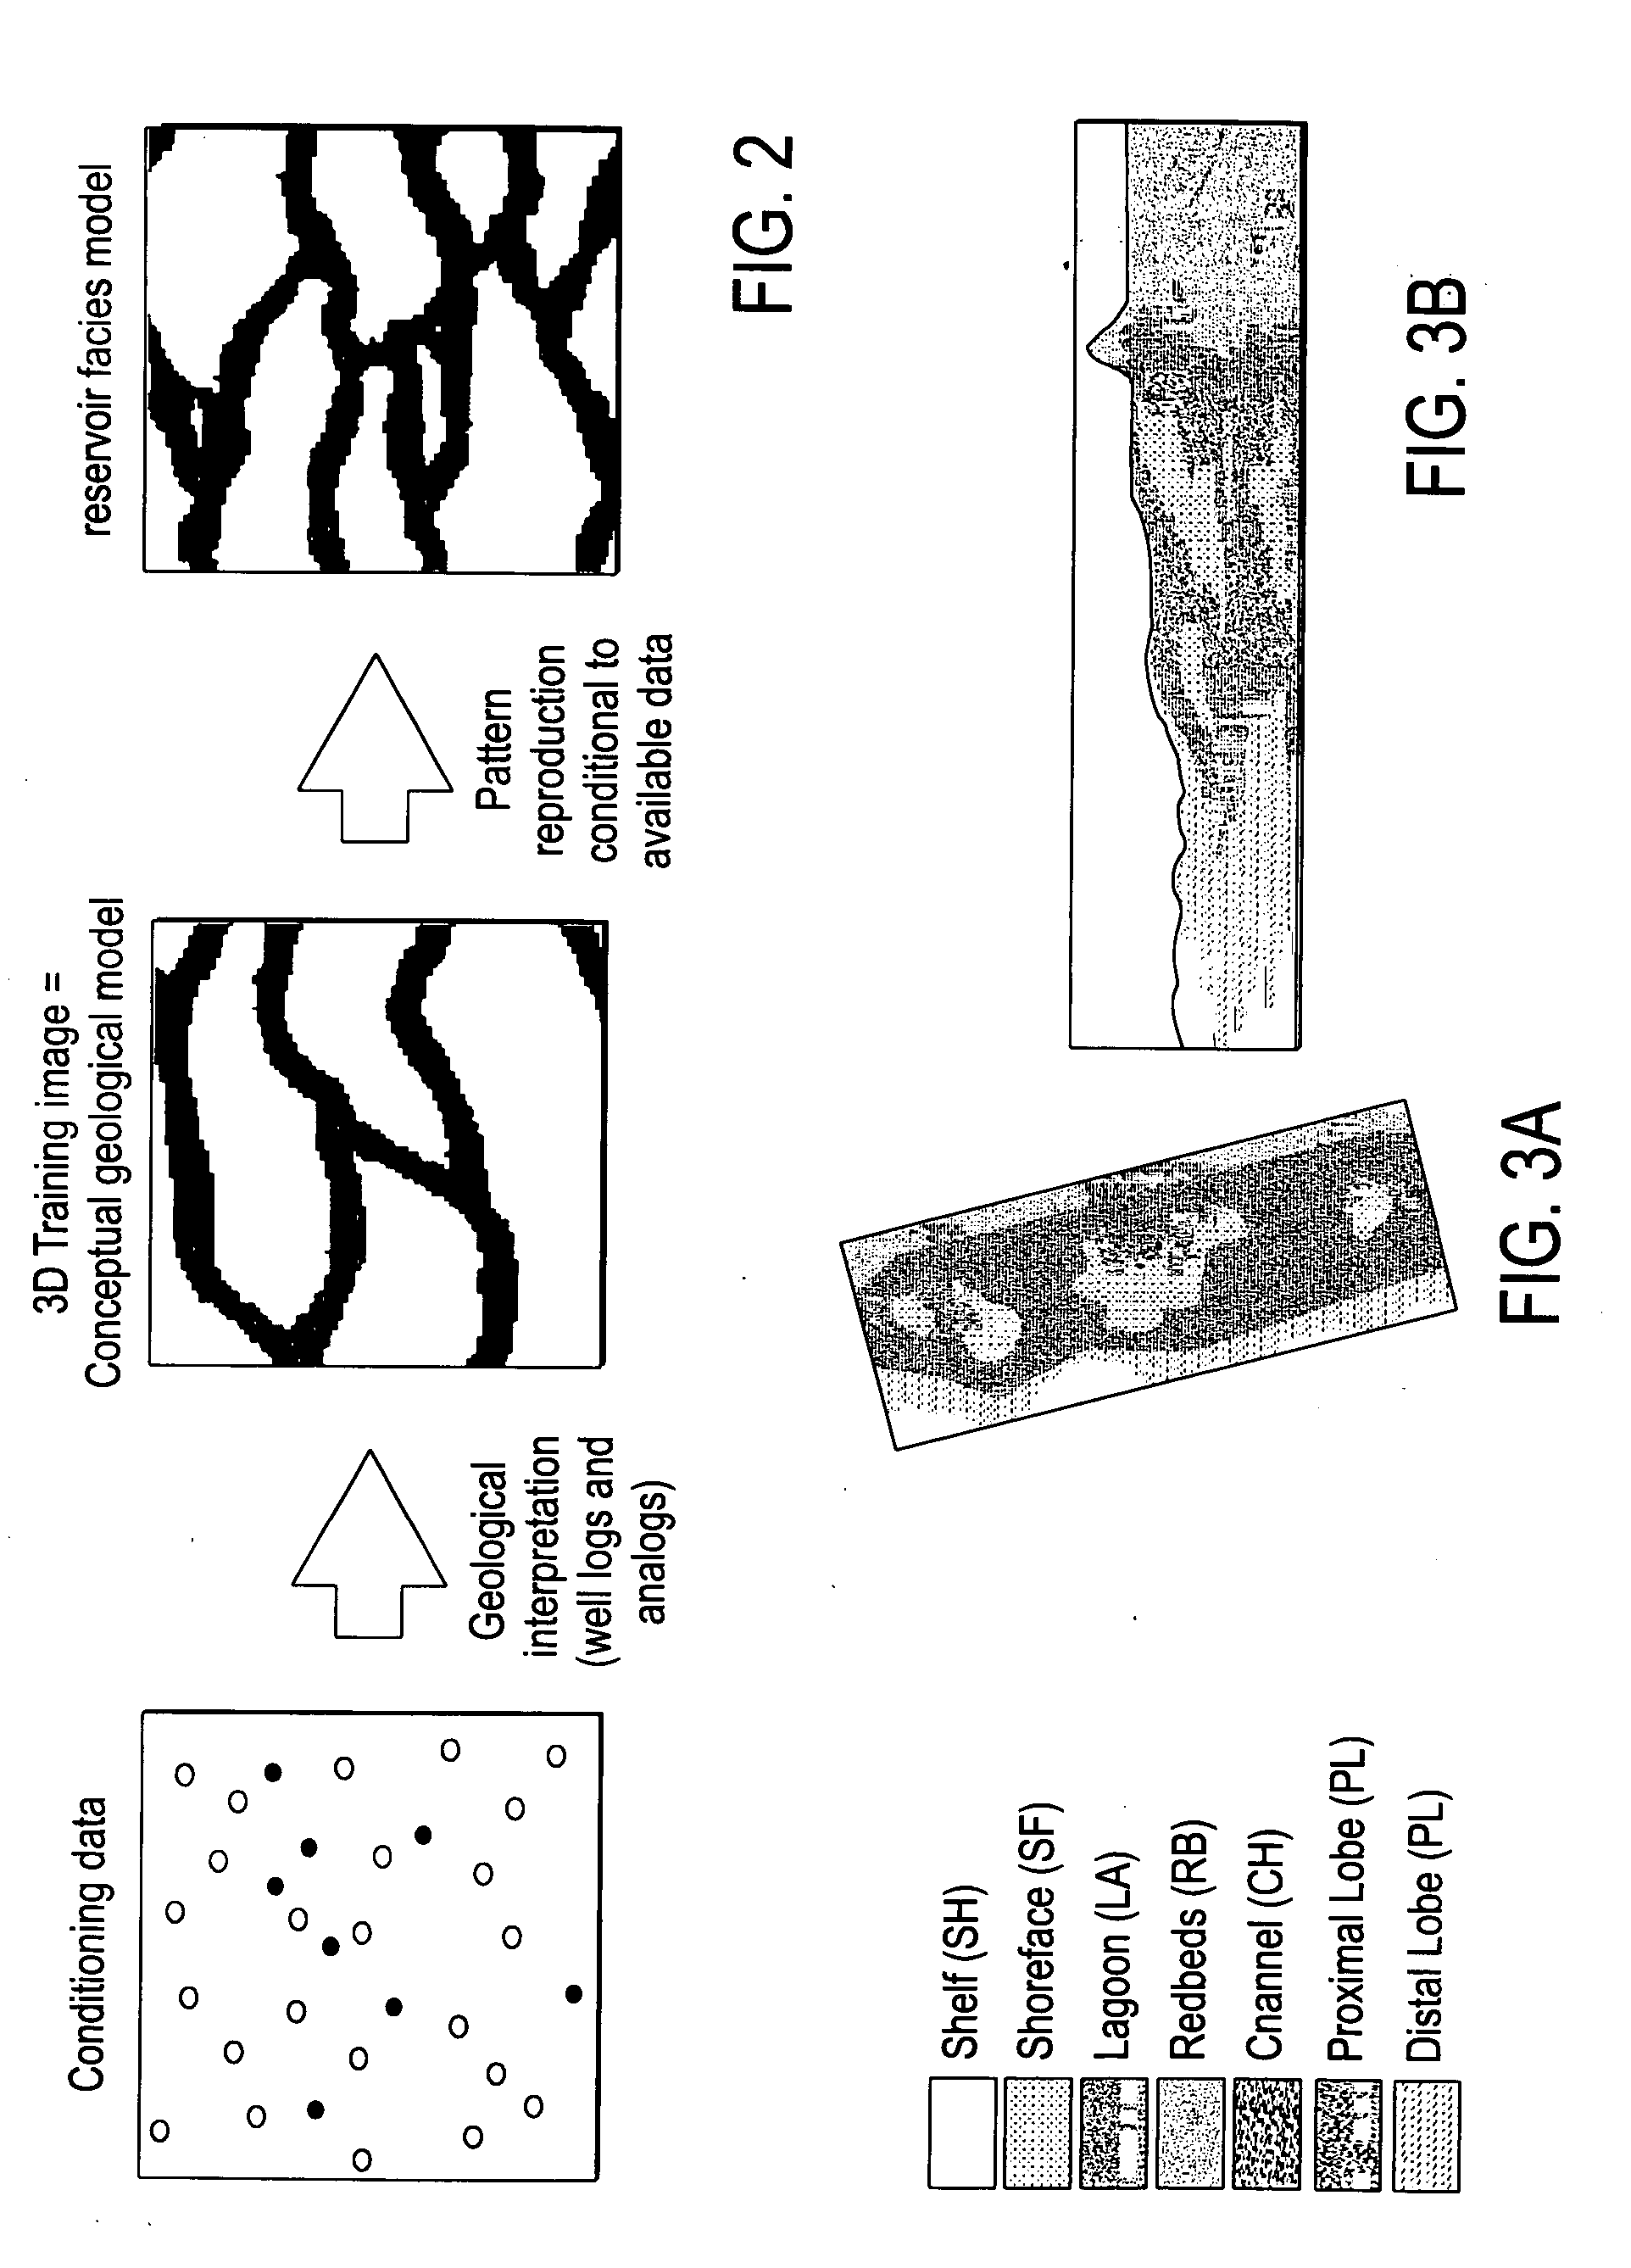 Method for making a reservoir facies model utilizing a training image and a geologically interpreted facies probability cube